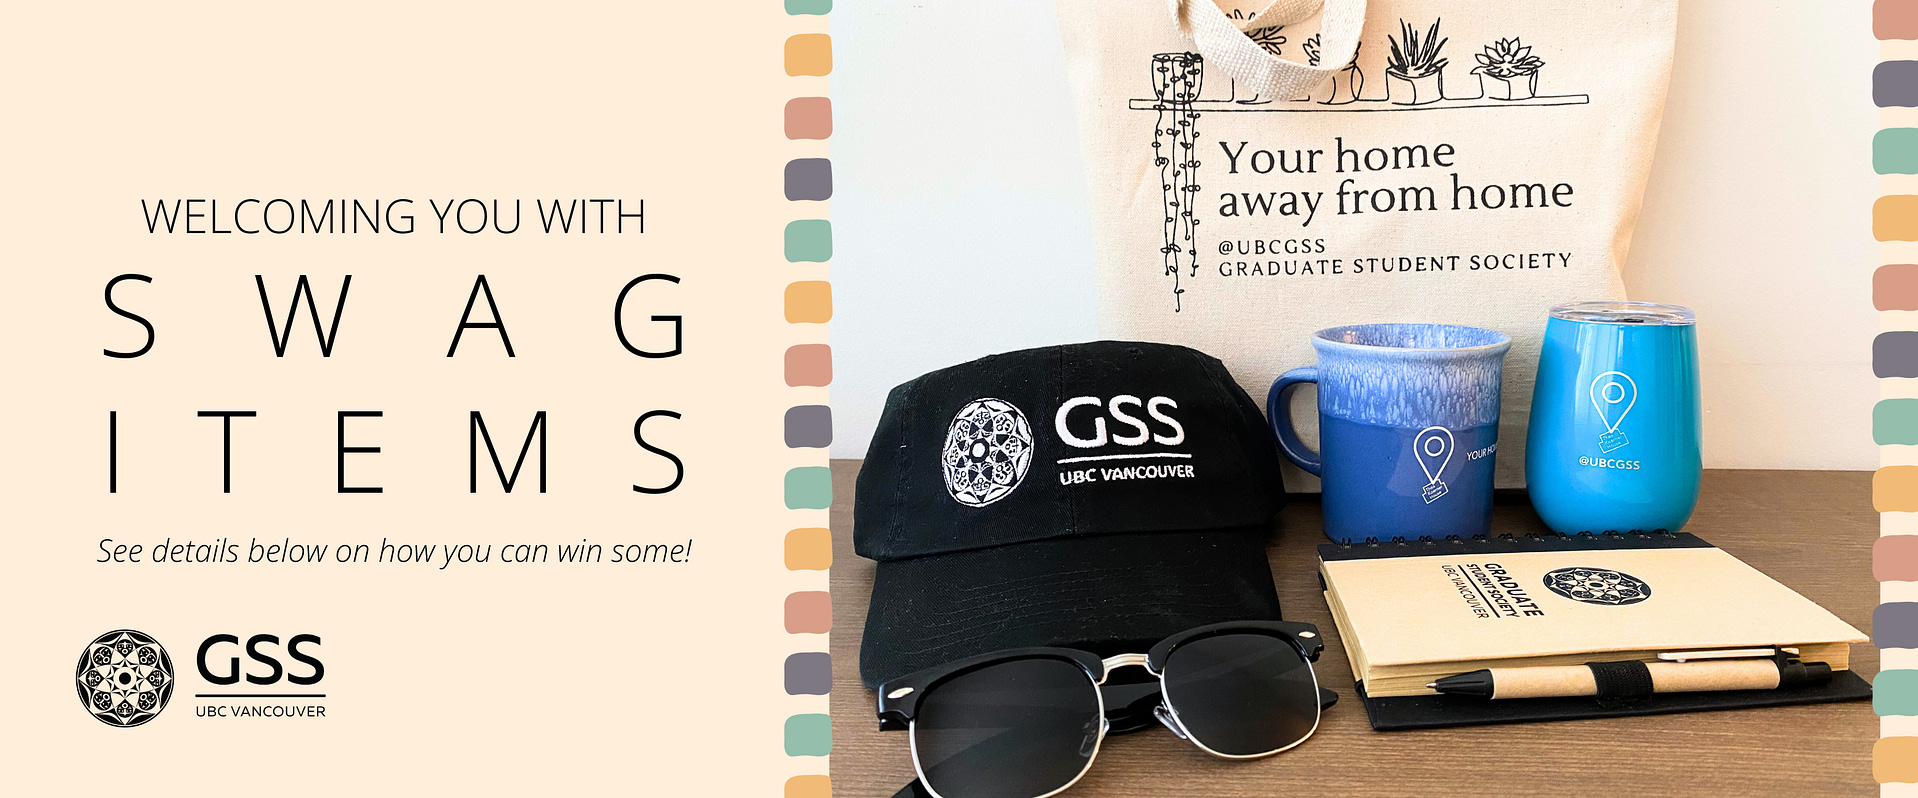 Get your GSS Swags!